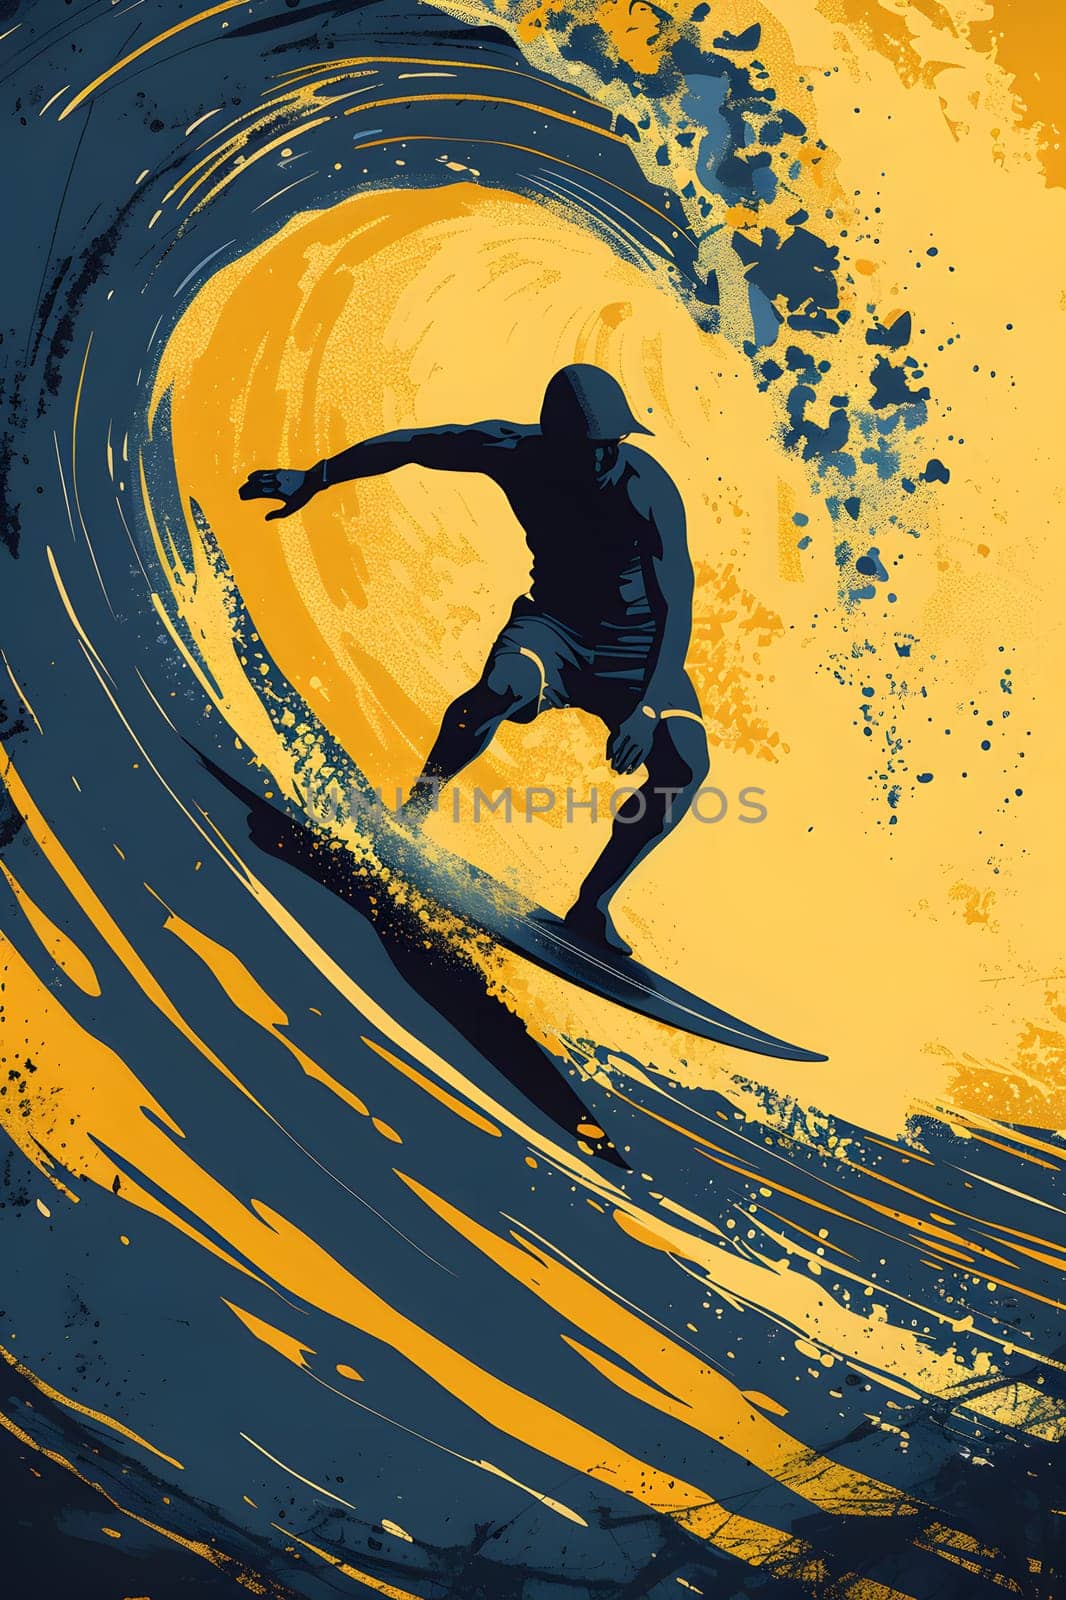 a man is riding a wave on a surfboard by Nadtochiy